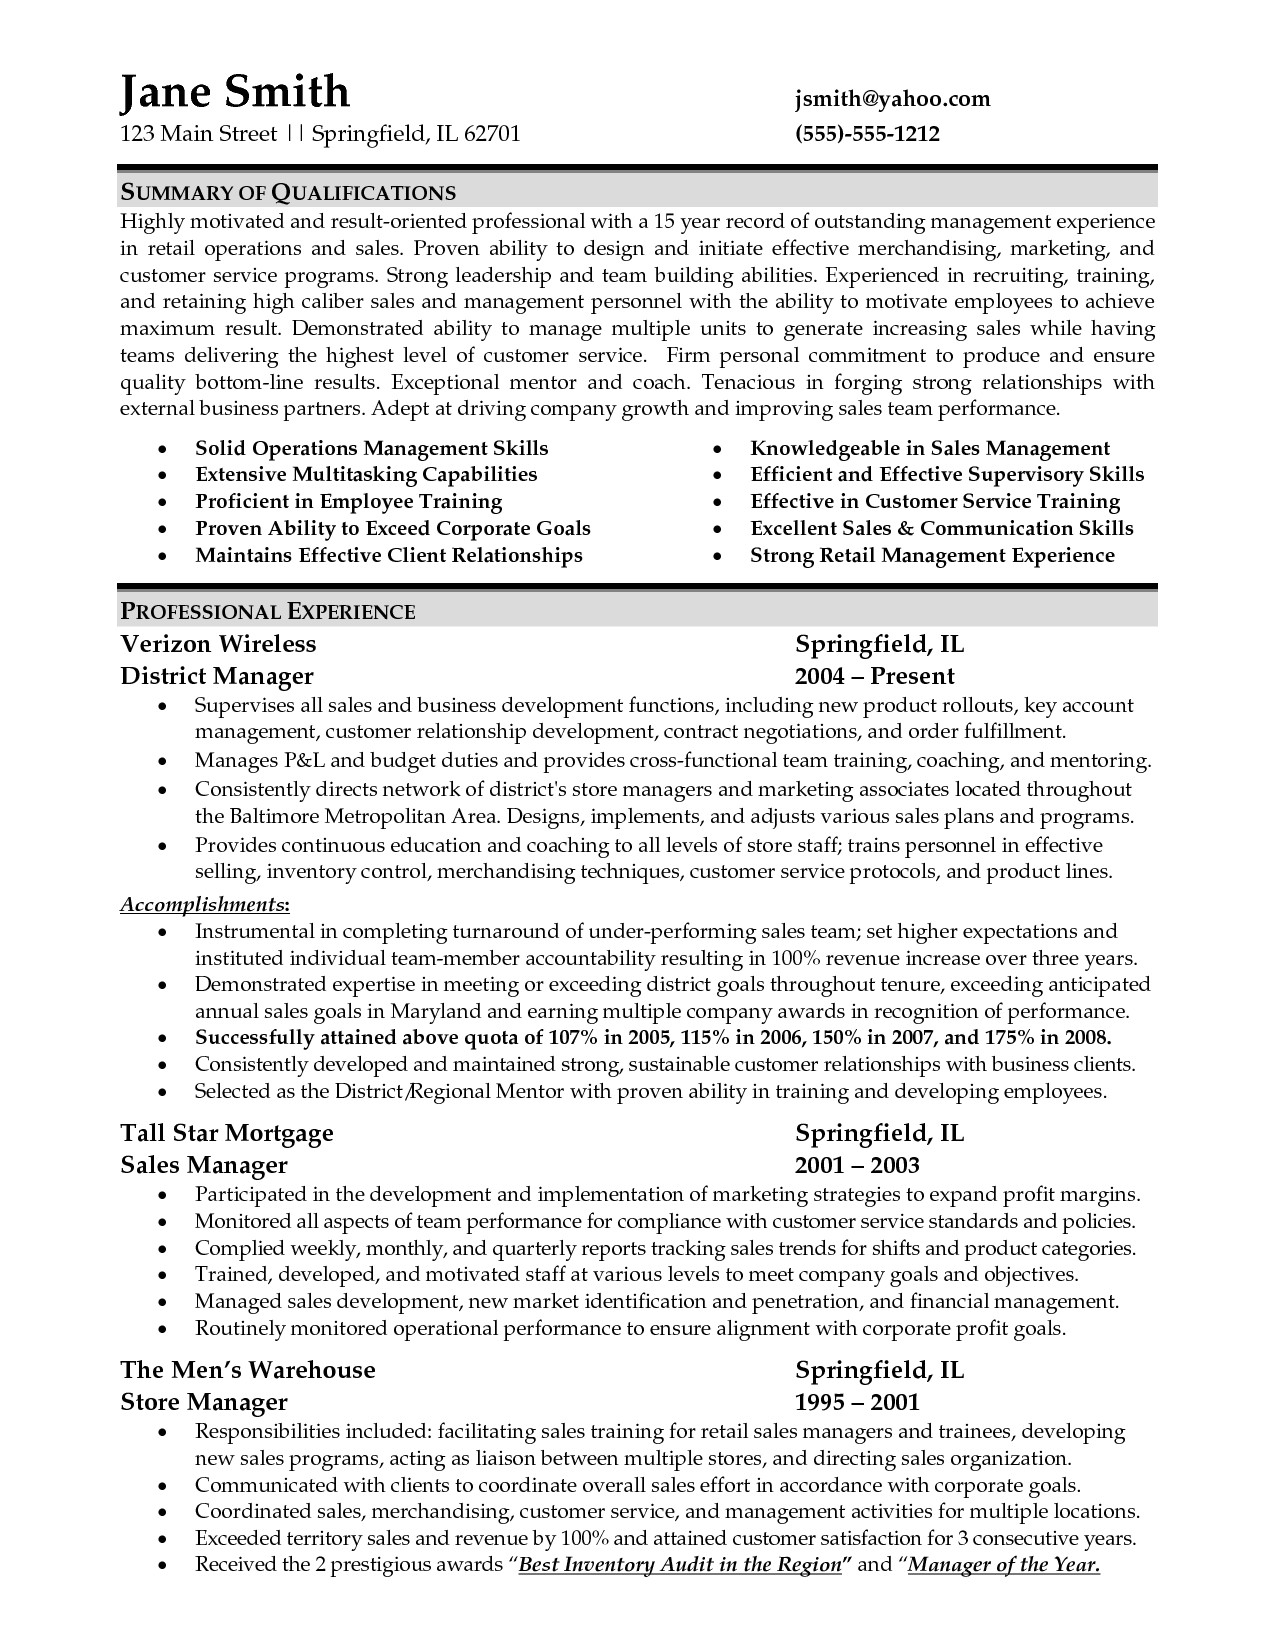 retail assistant manager resume objective examples